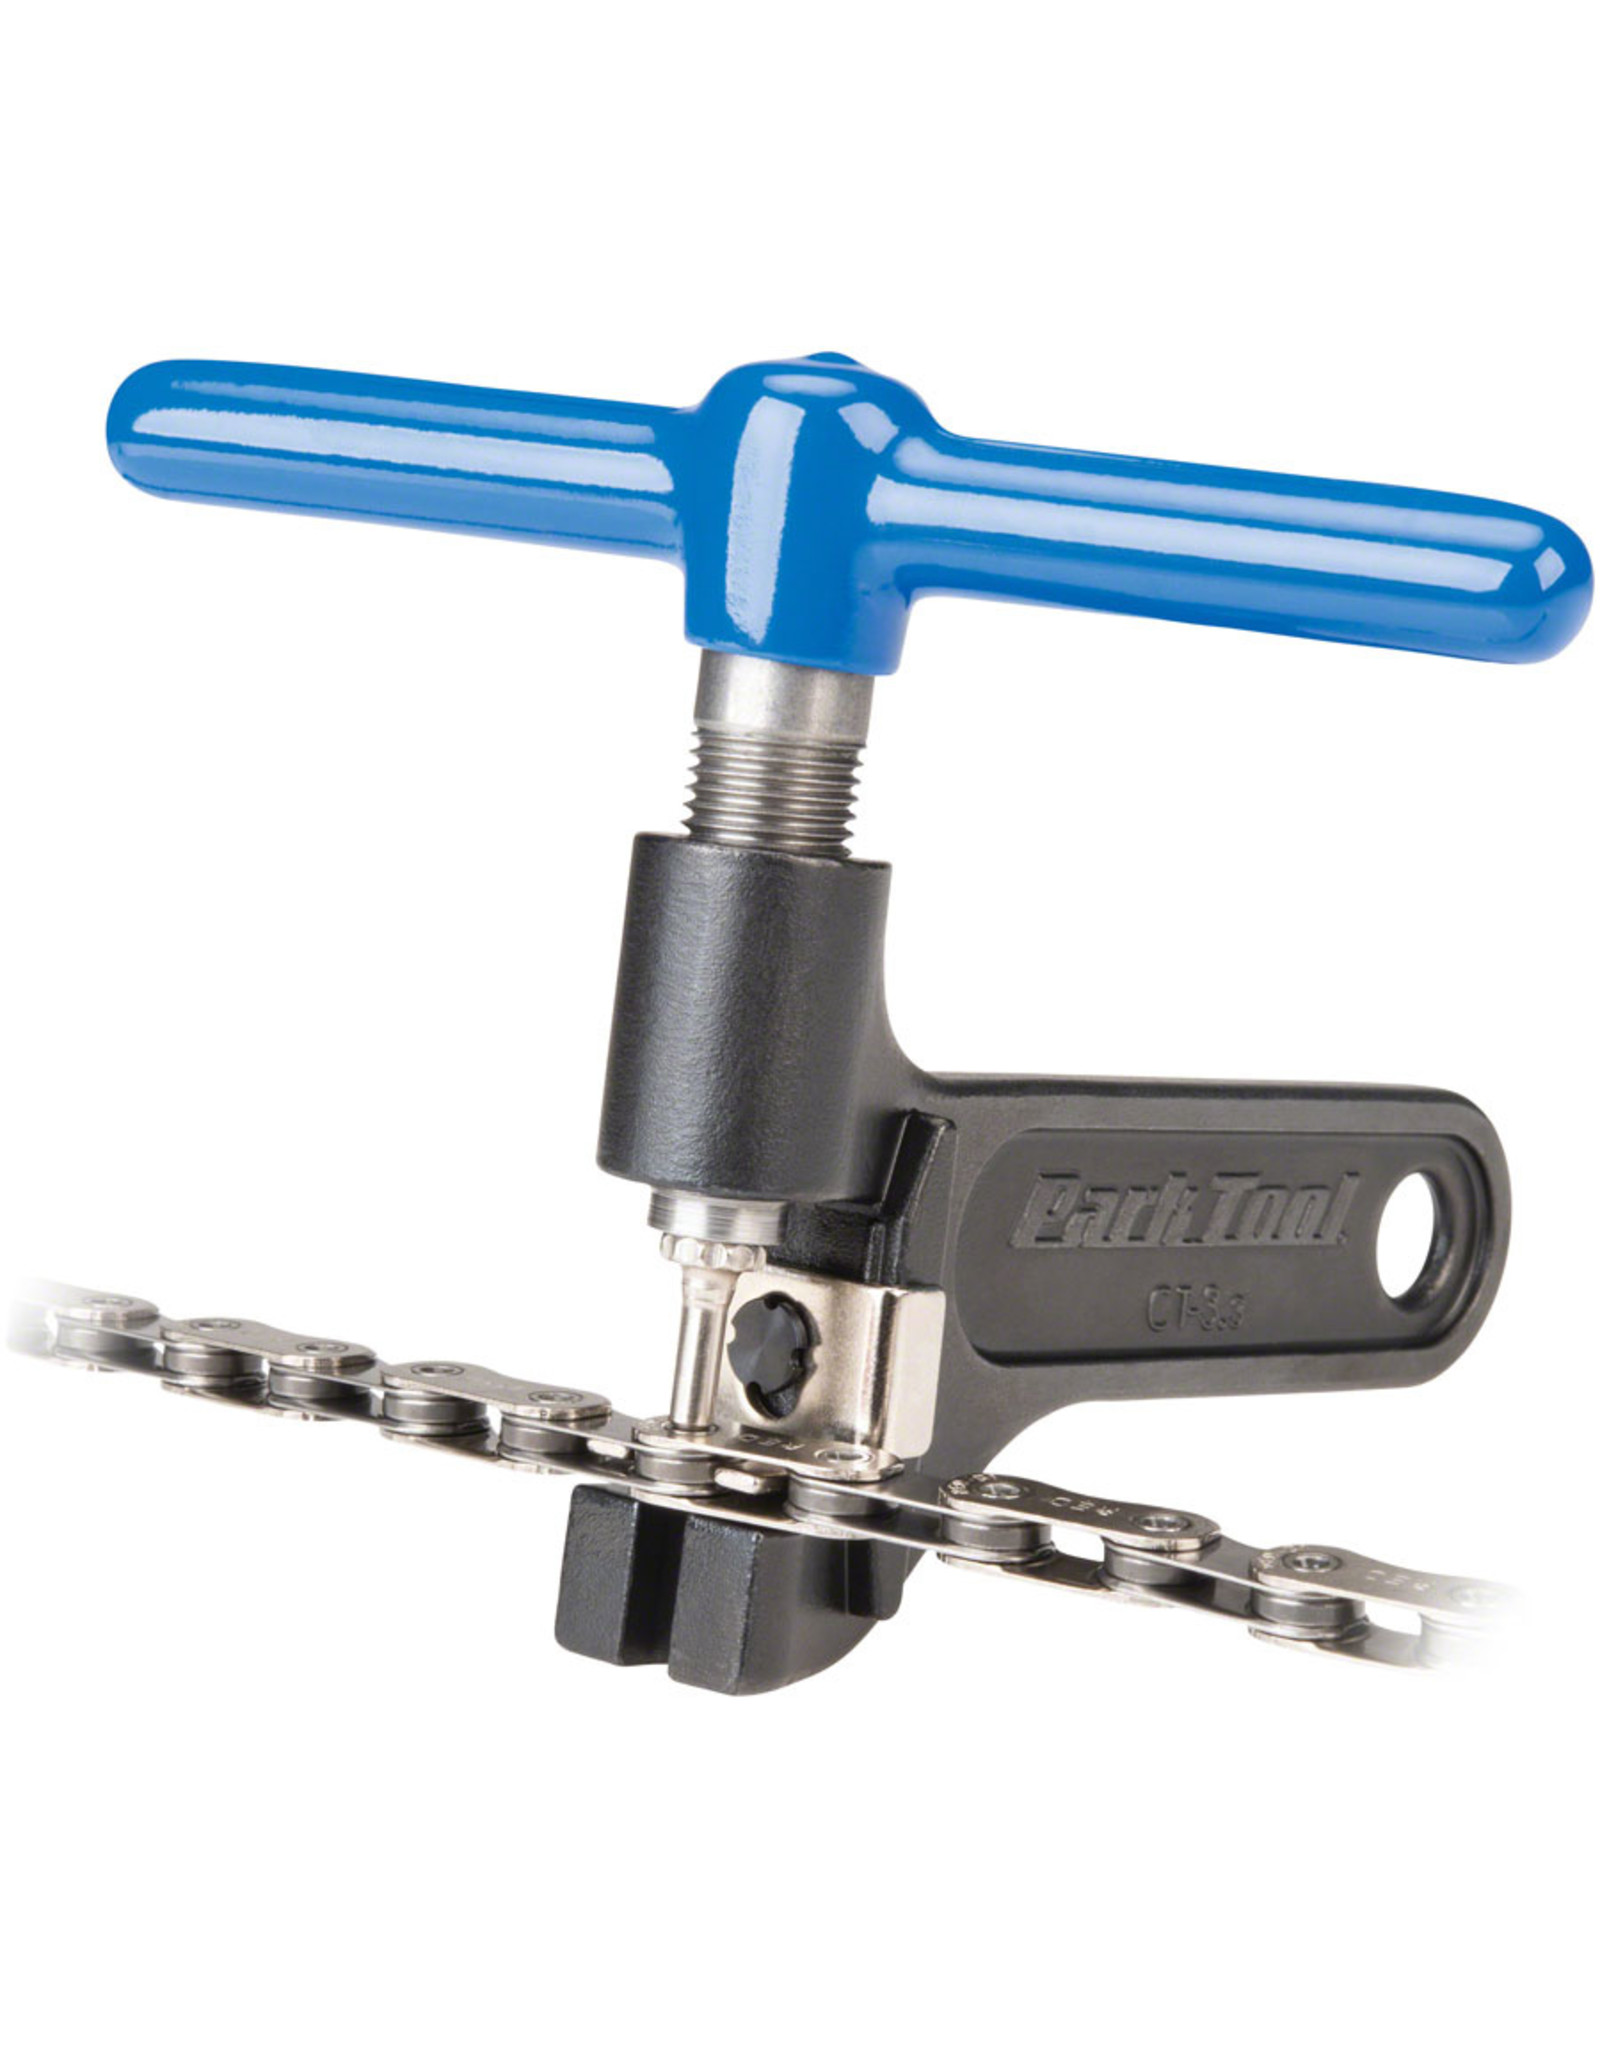 PARK TOOL Park Tool CT-3.3 5-12 Speed Chain Tool